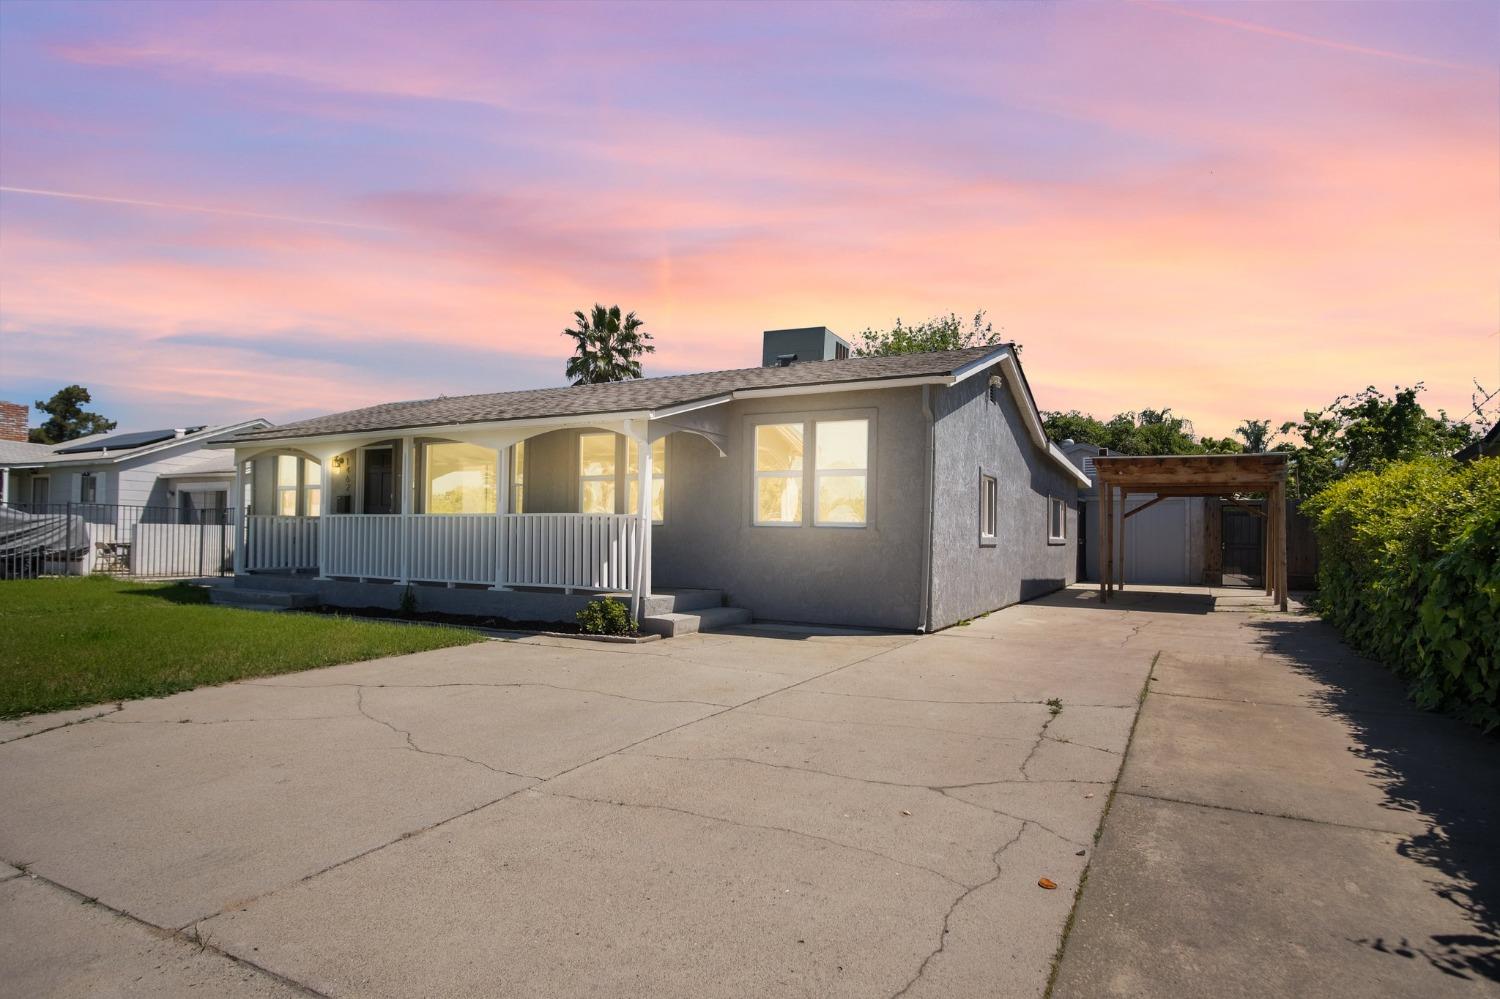 Photo of 1462 Eucalyptus St in Atwater, CA